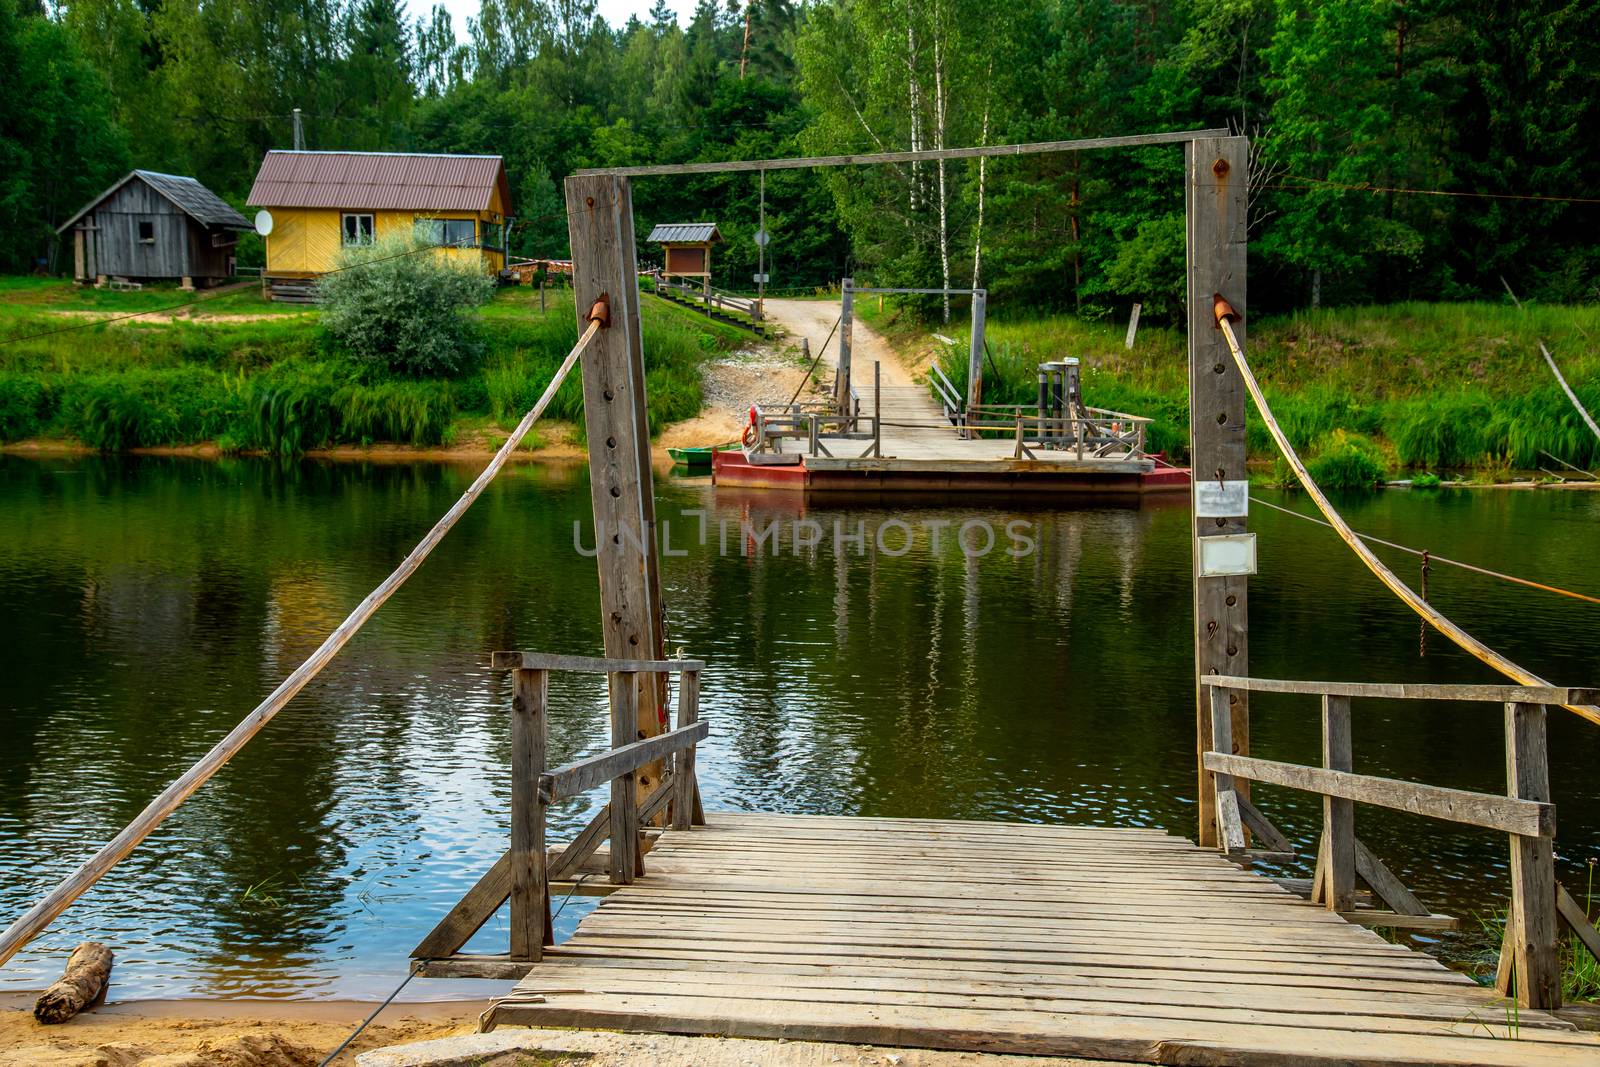 Ligatne ferry crossing on the bank of river Gauja. Ferry across river in Latvia. The ferry over Gauja river is the only crossing of this type in the Baltic States. Ferry is made of two boats fastened together on which there is a plank layer.

